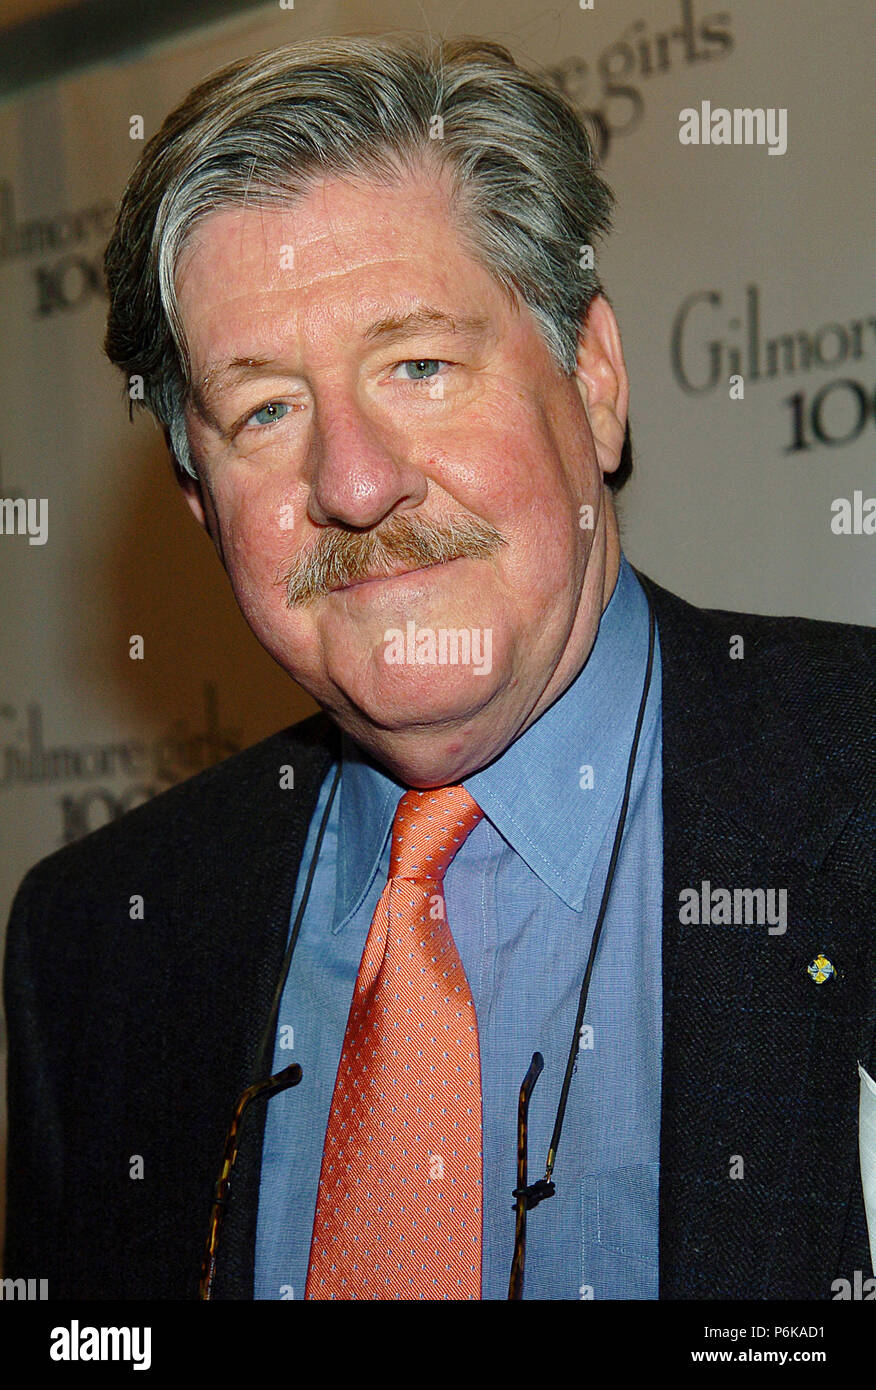 Edward Hermann arriving at the Gilmore 100th episode Party at the Space In Santa Monica / Los Angeles. December 4, 2004.HermannEdward 016 Red Carpet Event, Vertical, USA, Film Industry, Celebrities,  Photography, Bestof, Arts Culture and Entertainment, Topix Celebrities fashion /  Vertical, Best of, Event in Hollywood Life - California,  Red Carpet and backstage, USA, Film Industry, Celebrities,  movie celebrities, TV celebrities, Music celebrities, Photography, Bestof, Arts Culture and Entertainment,  Topix, headshot, vertical, one person,, from the year , 2004, inquiry tsuni@Gamma-USA.com Stock Photo